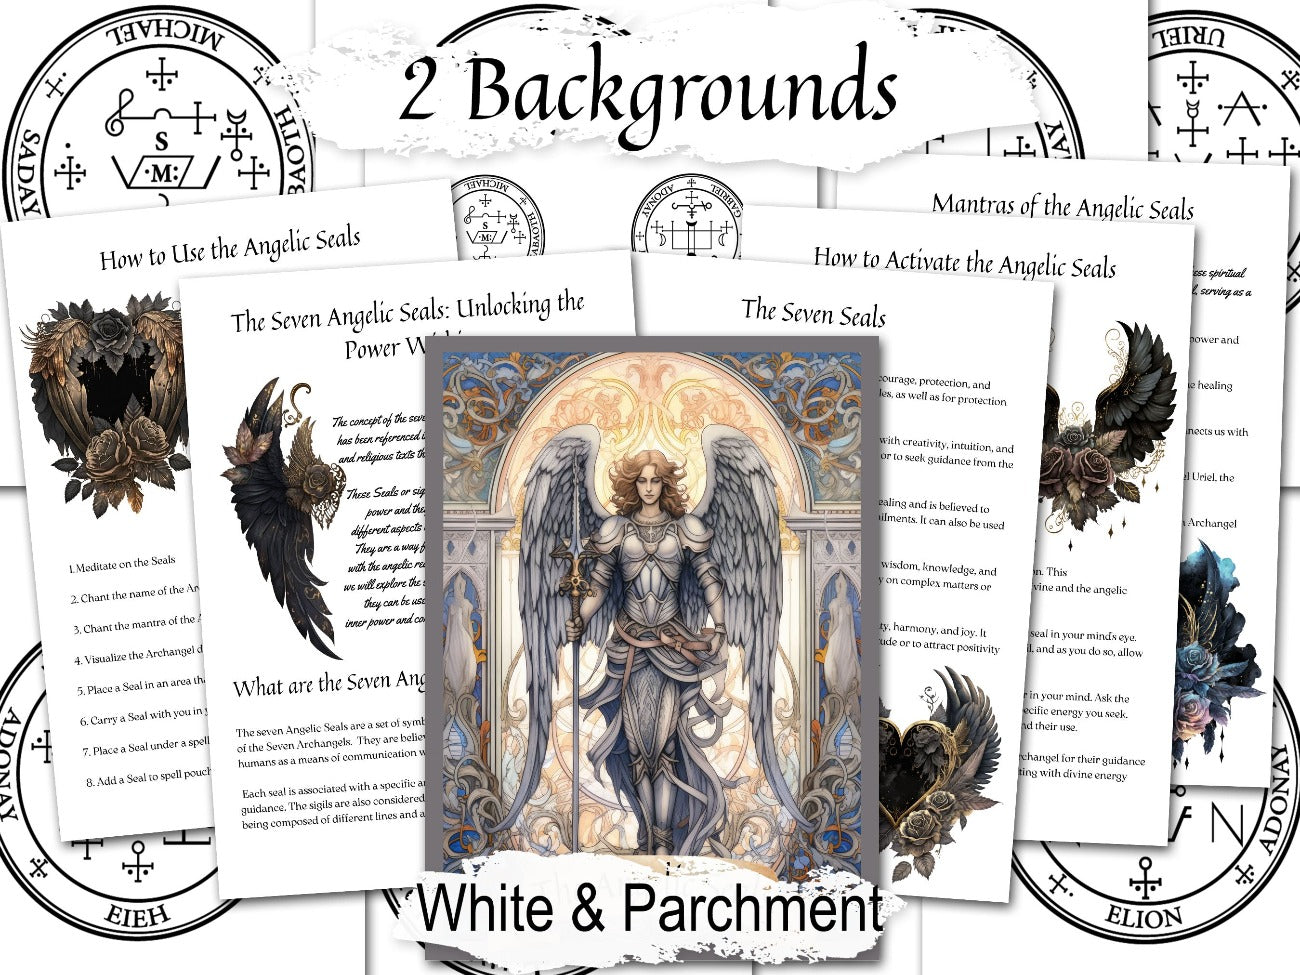 7 ANGELIC SEALS, 14 Pages, Divine wisdom of Archangels from Grimoire of Armadel, shown with the optional white background - Morgana Magick Spell